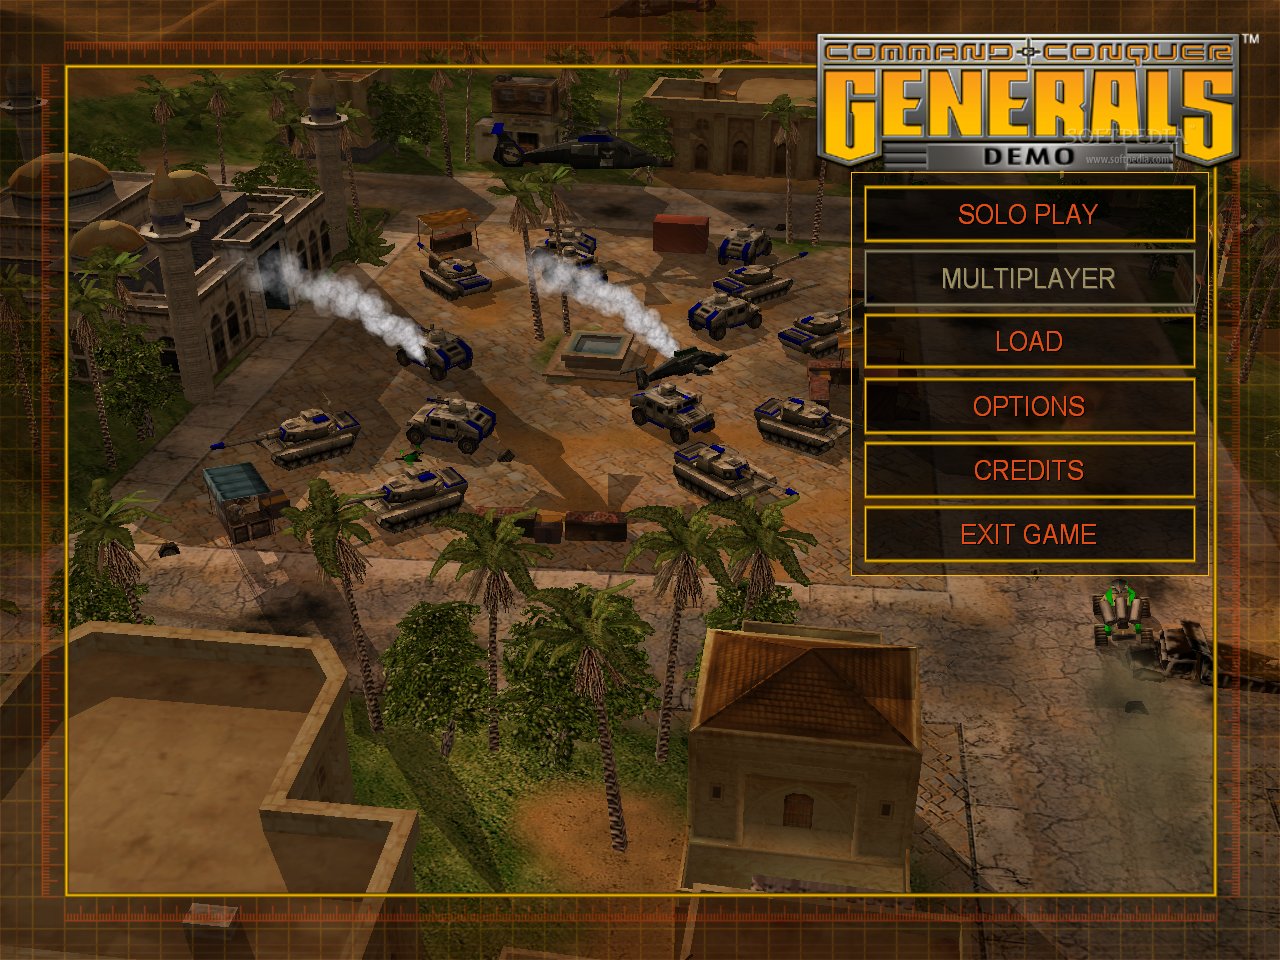 command and conquer generals zero hour patch 1.08 no cd